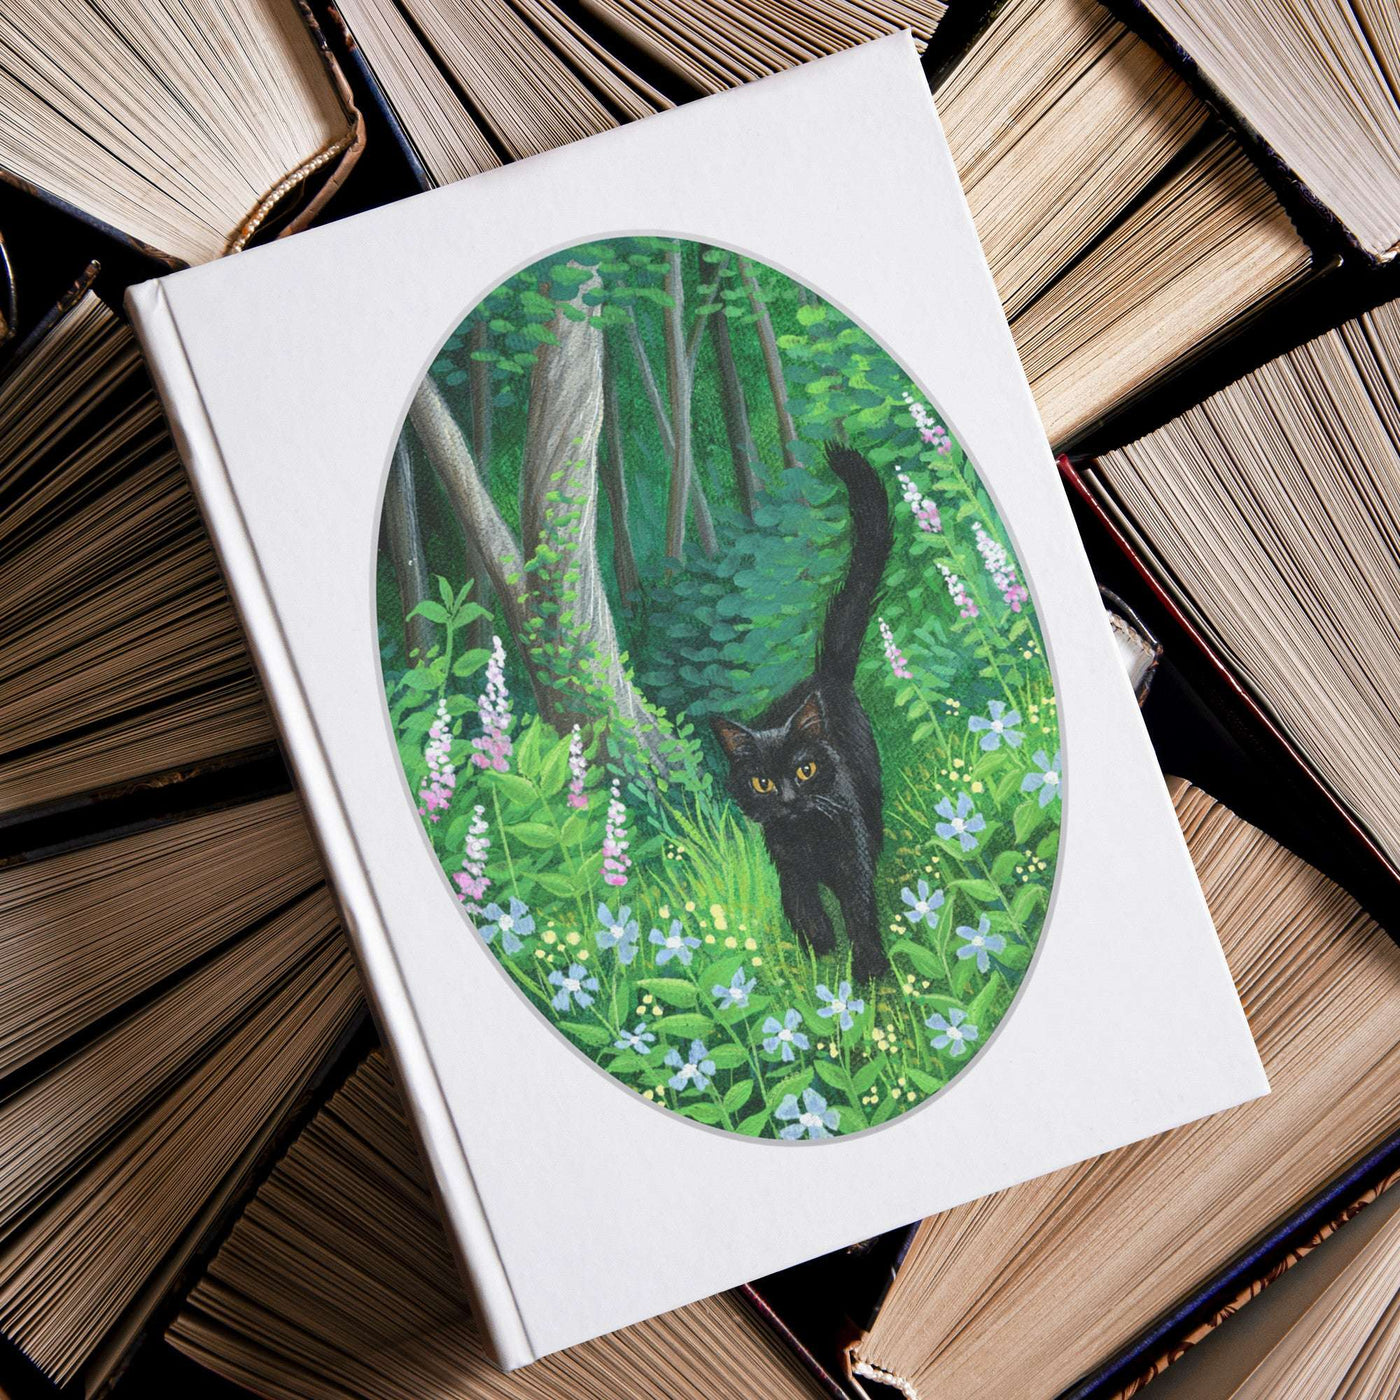 A Whiskered Welcome Journal with a cover illustration of a black cat in a lush green forest, surrounded by stacks of old books.